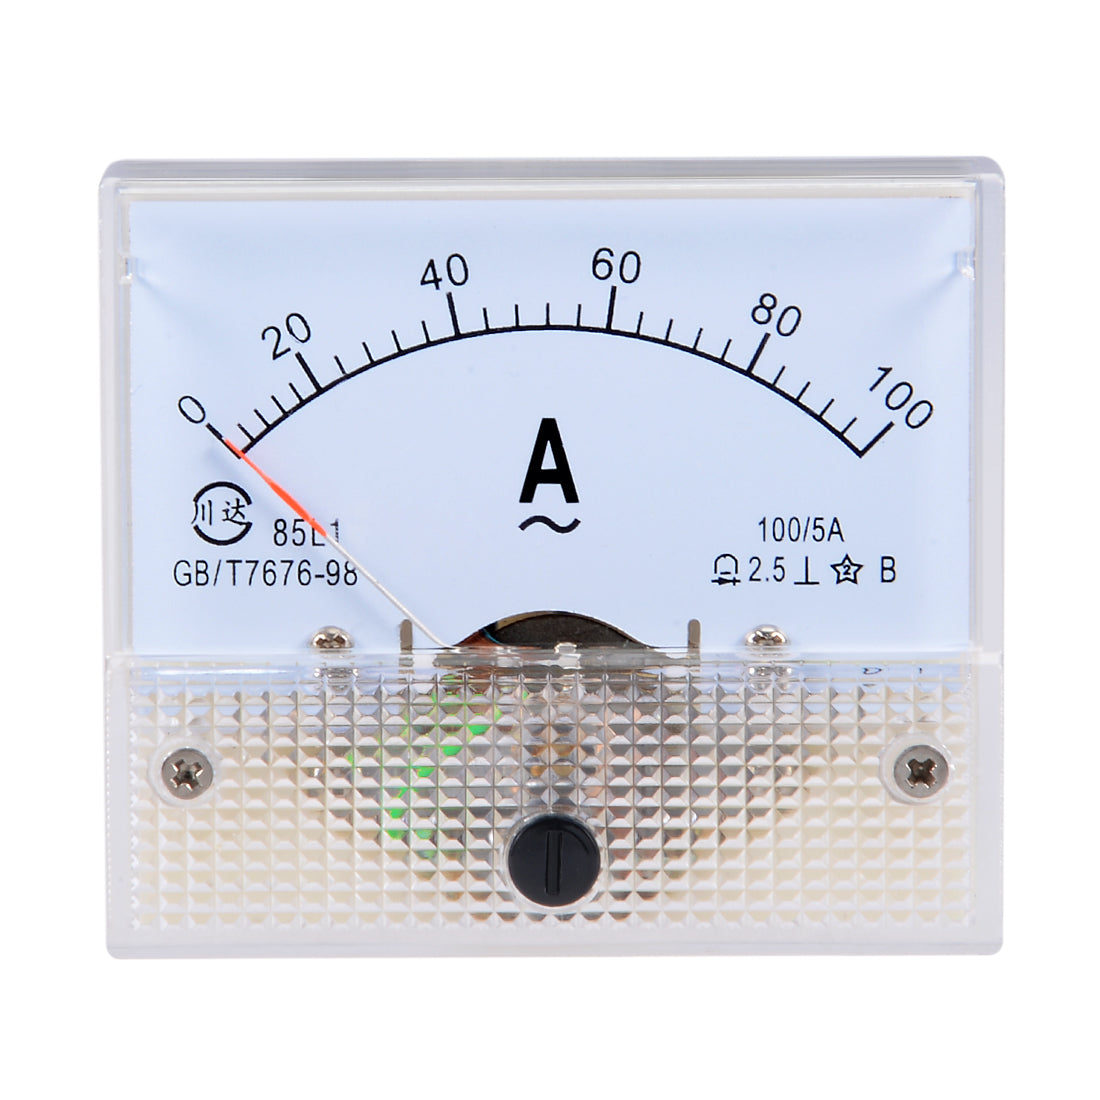 uxcell Uxcell AC 0-100A Analog Panel Ammeter Gauge Ampere Current Meter 85L1